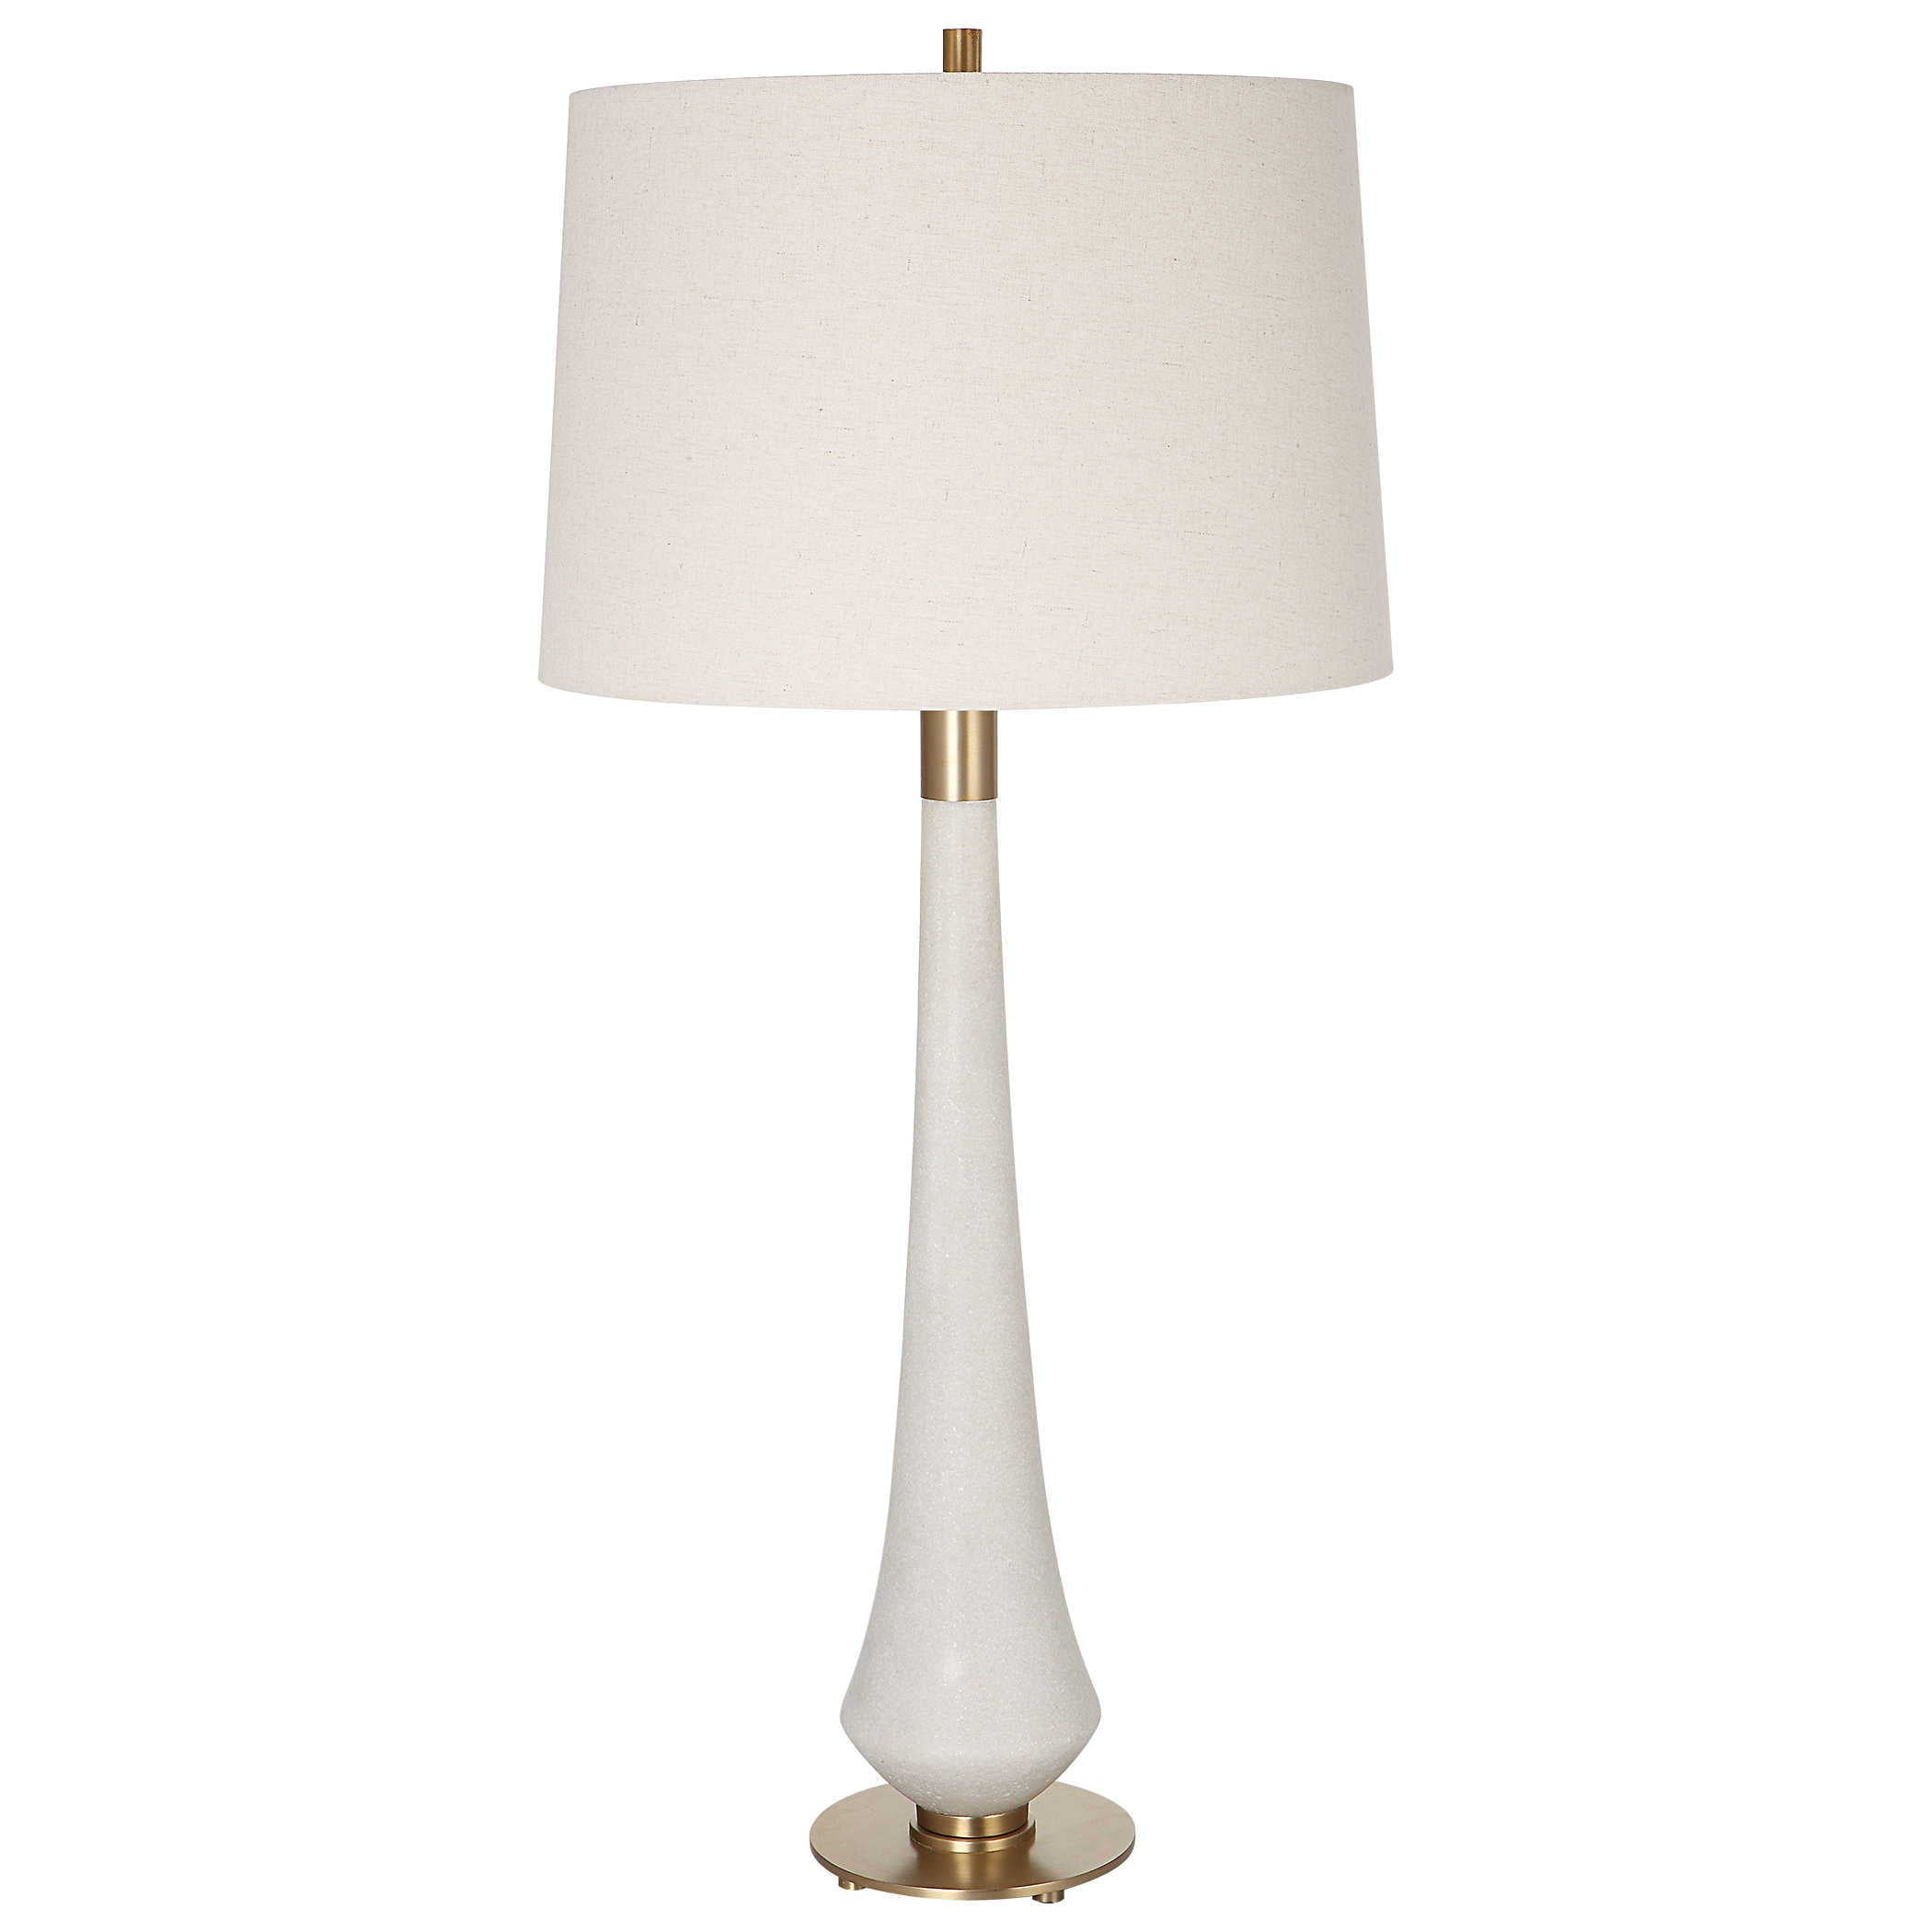 Marille - Stone Table Lamp - Beige